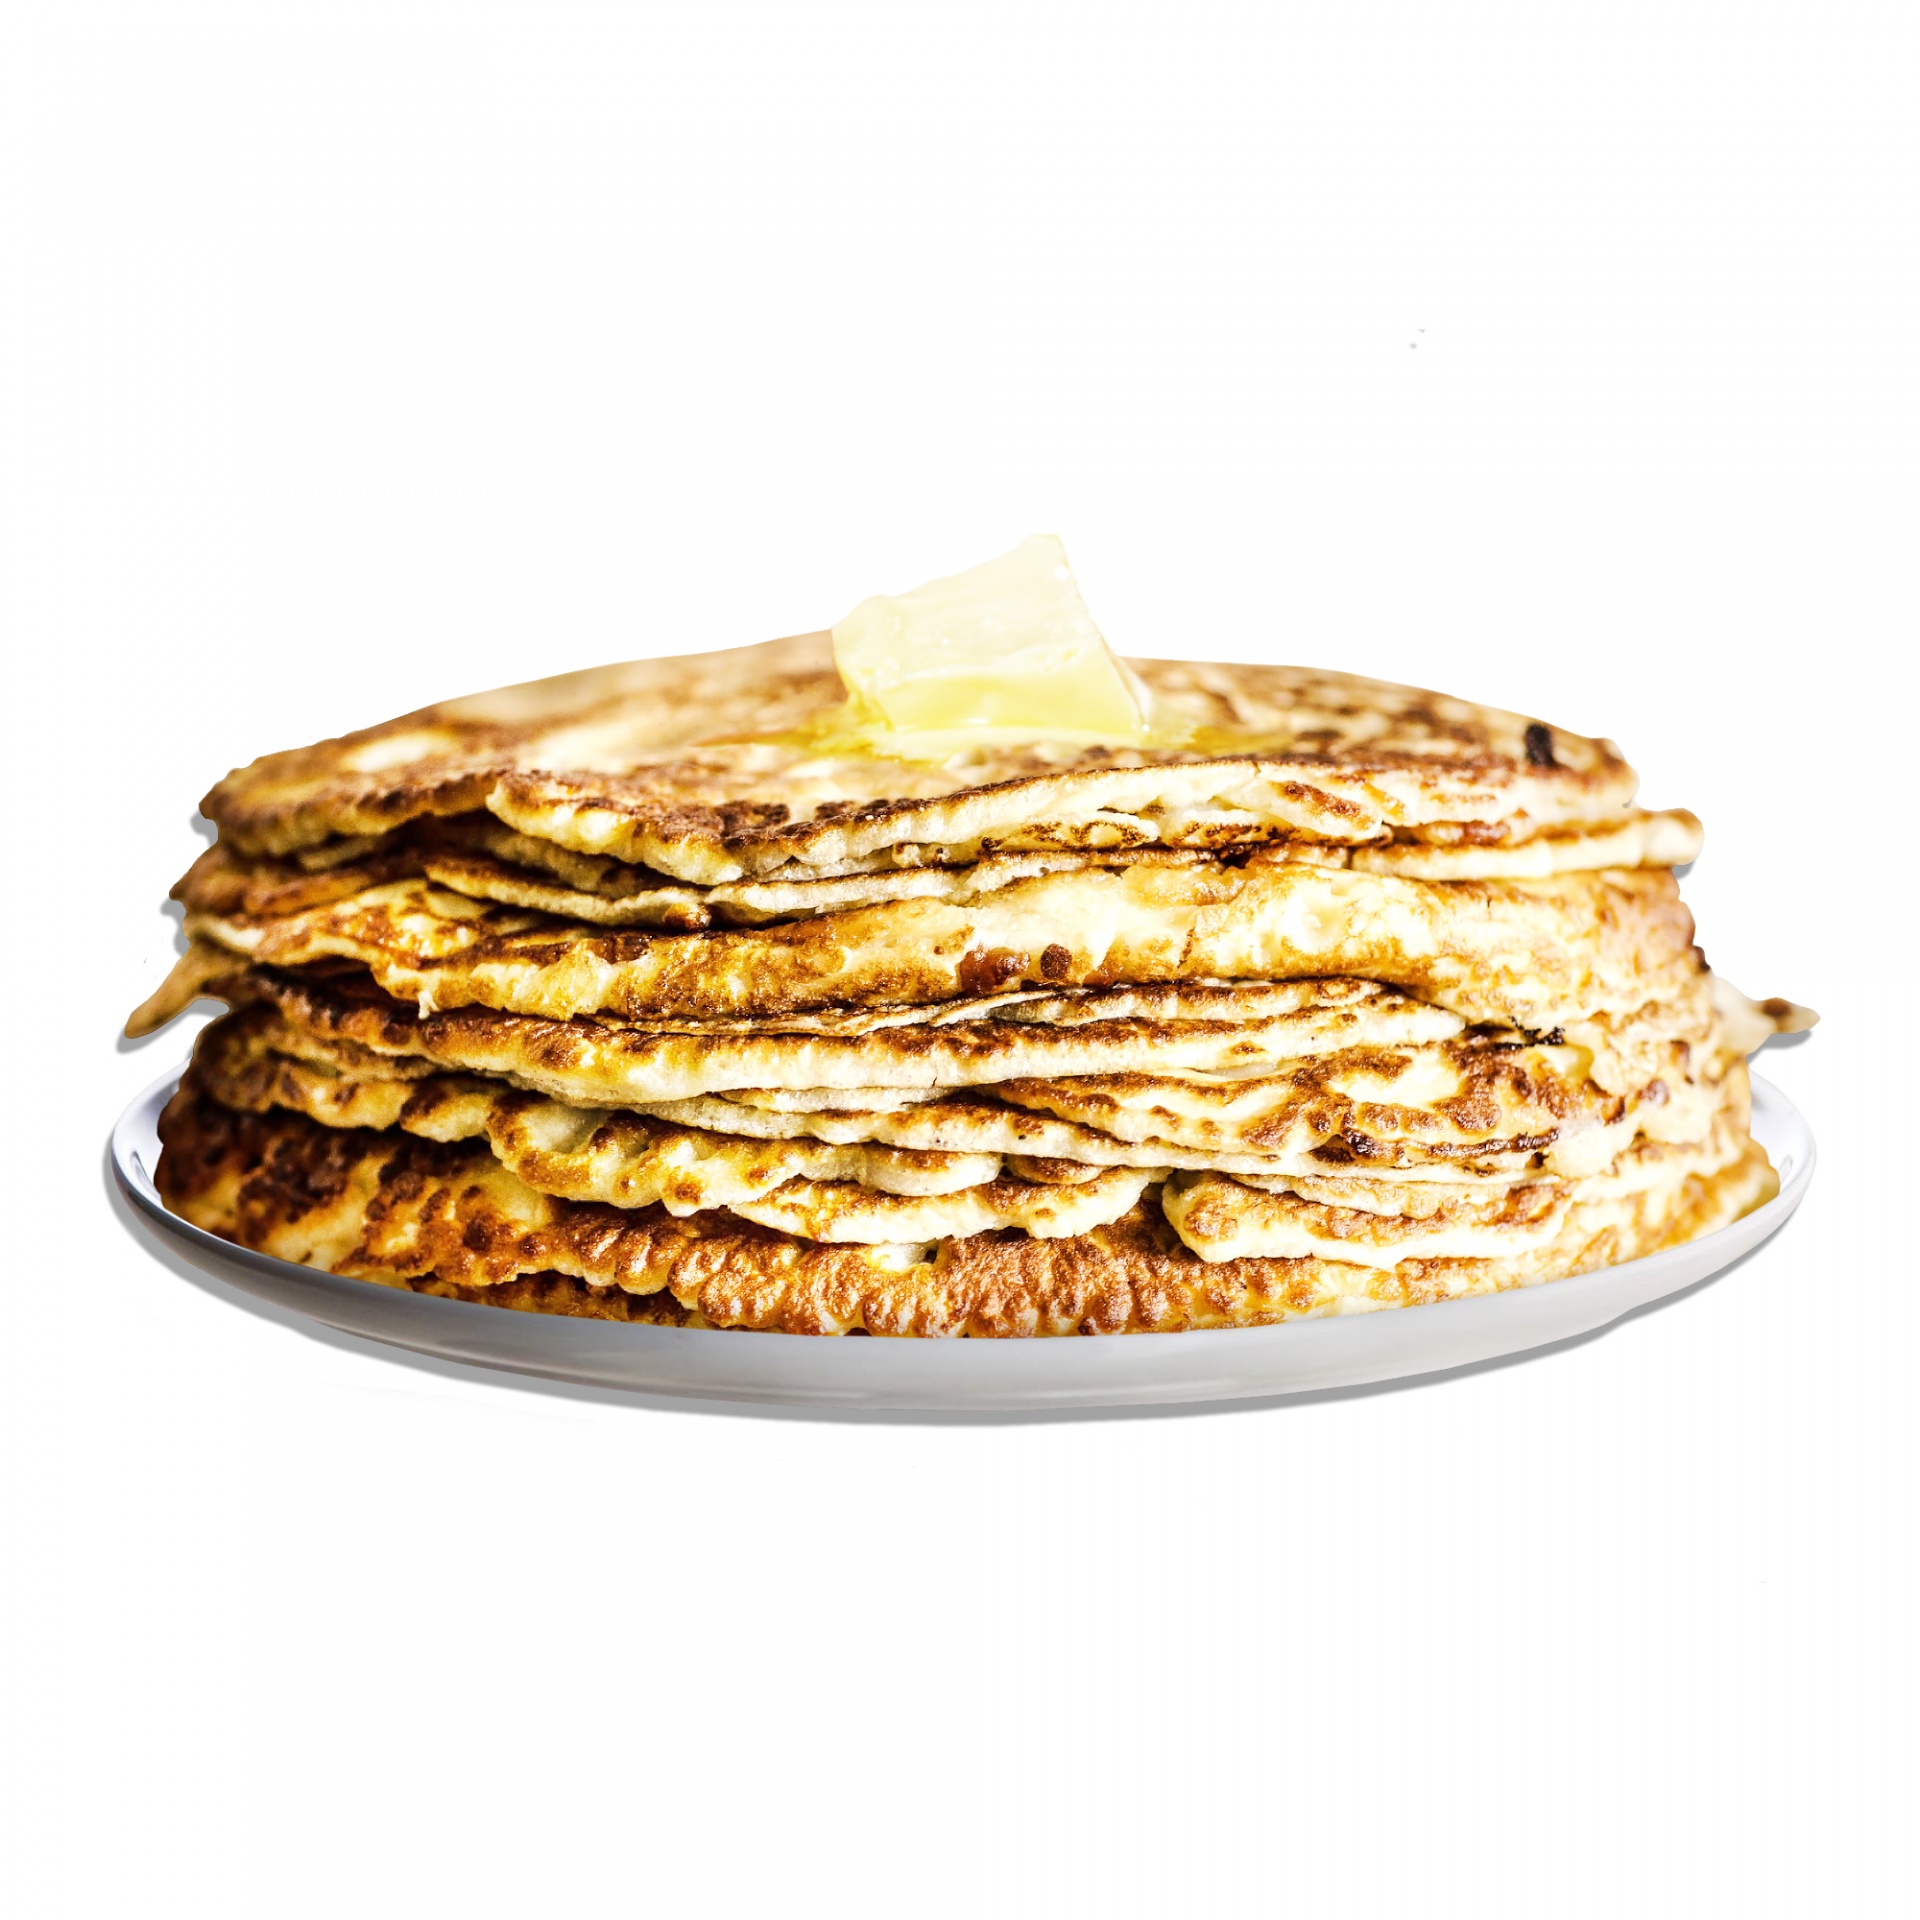 Oat and Wheat Germ Pancakes